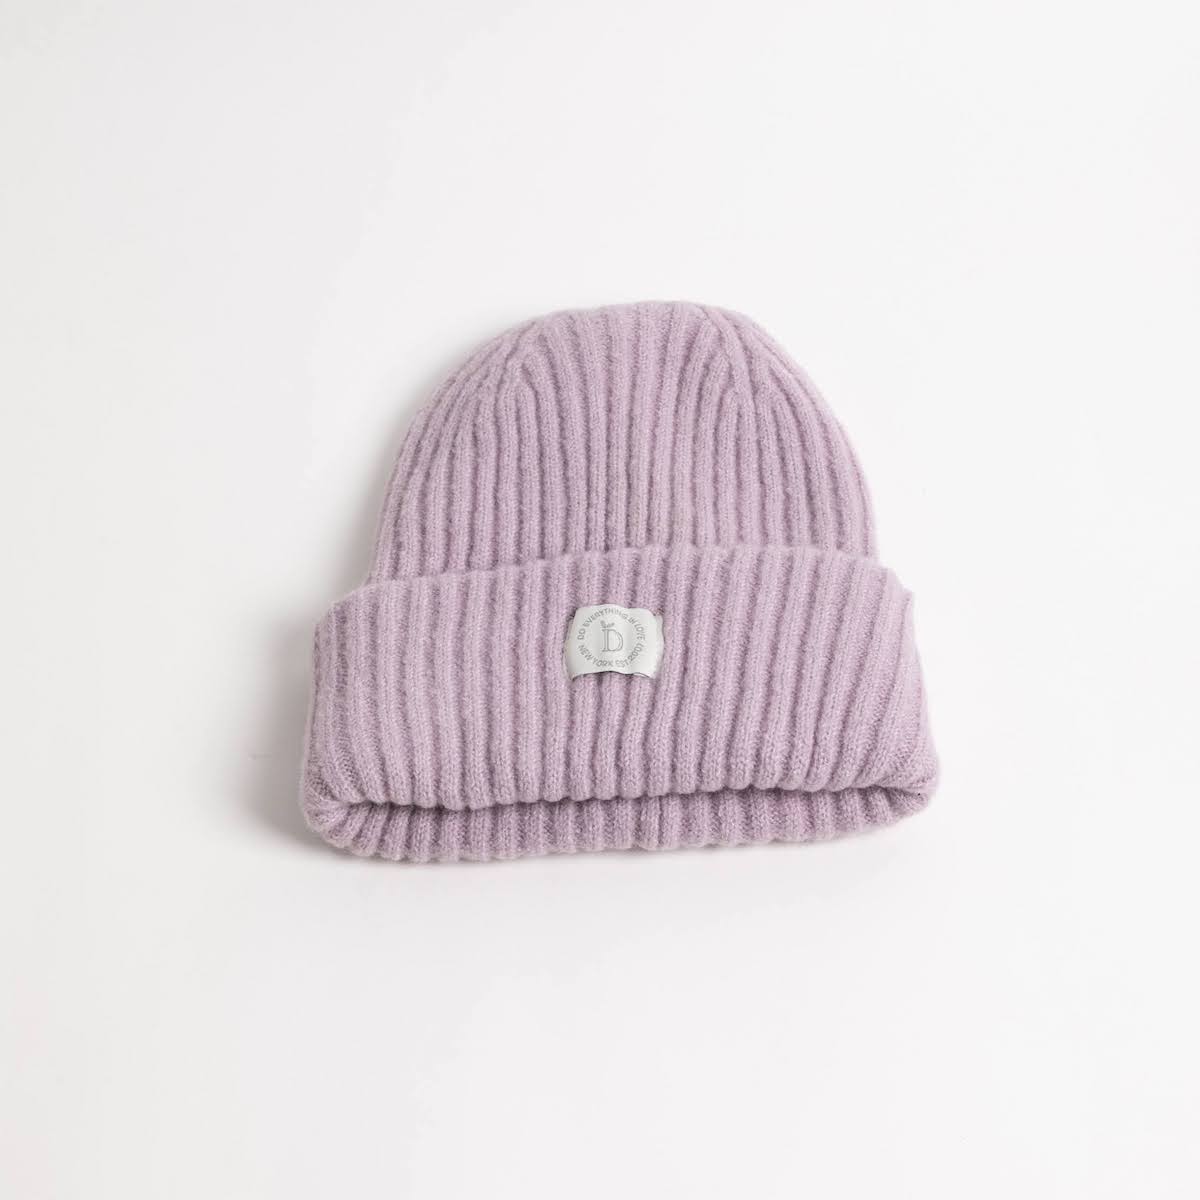 Solid Knit Muted Beanie - P I C N I C 